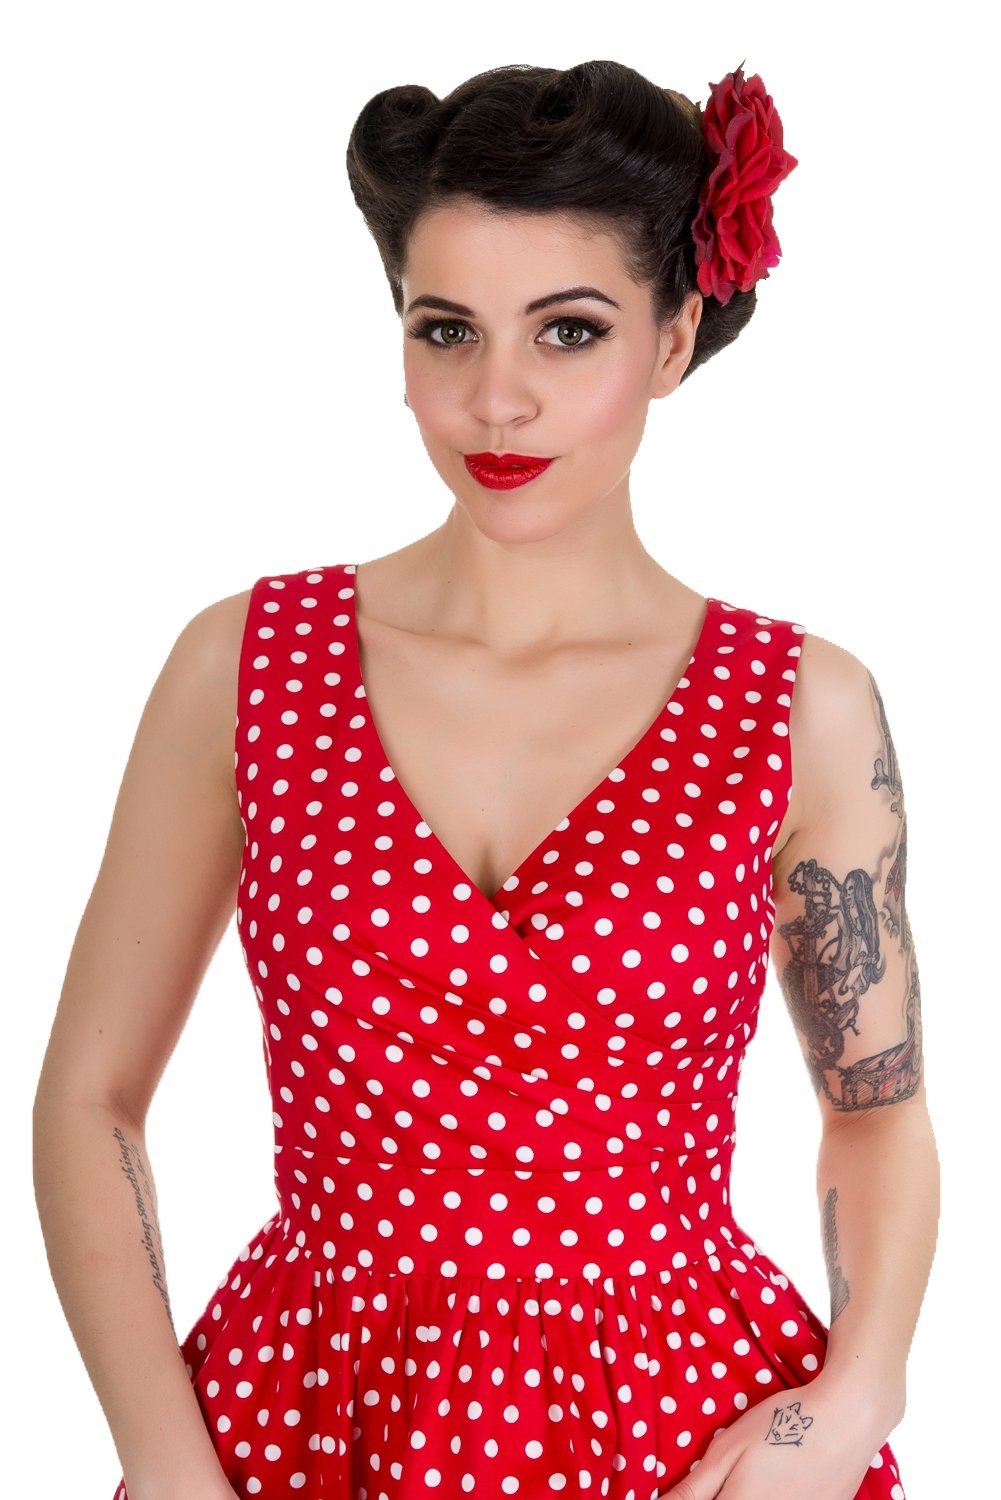 Model wearing our May crossover bust dress, in red/white polka dot print, close up view